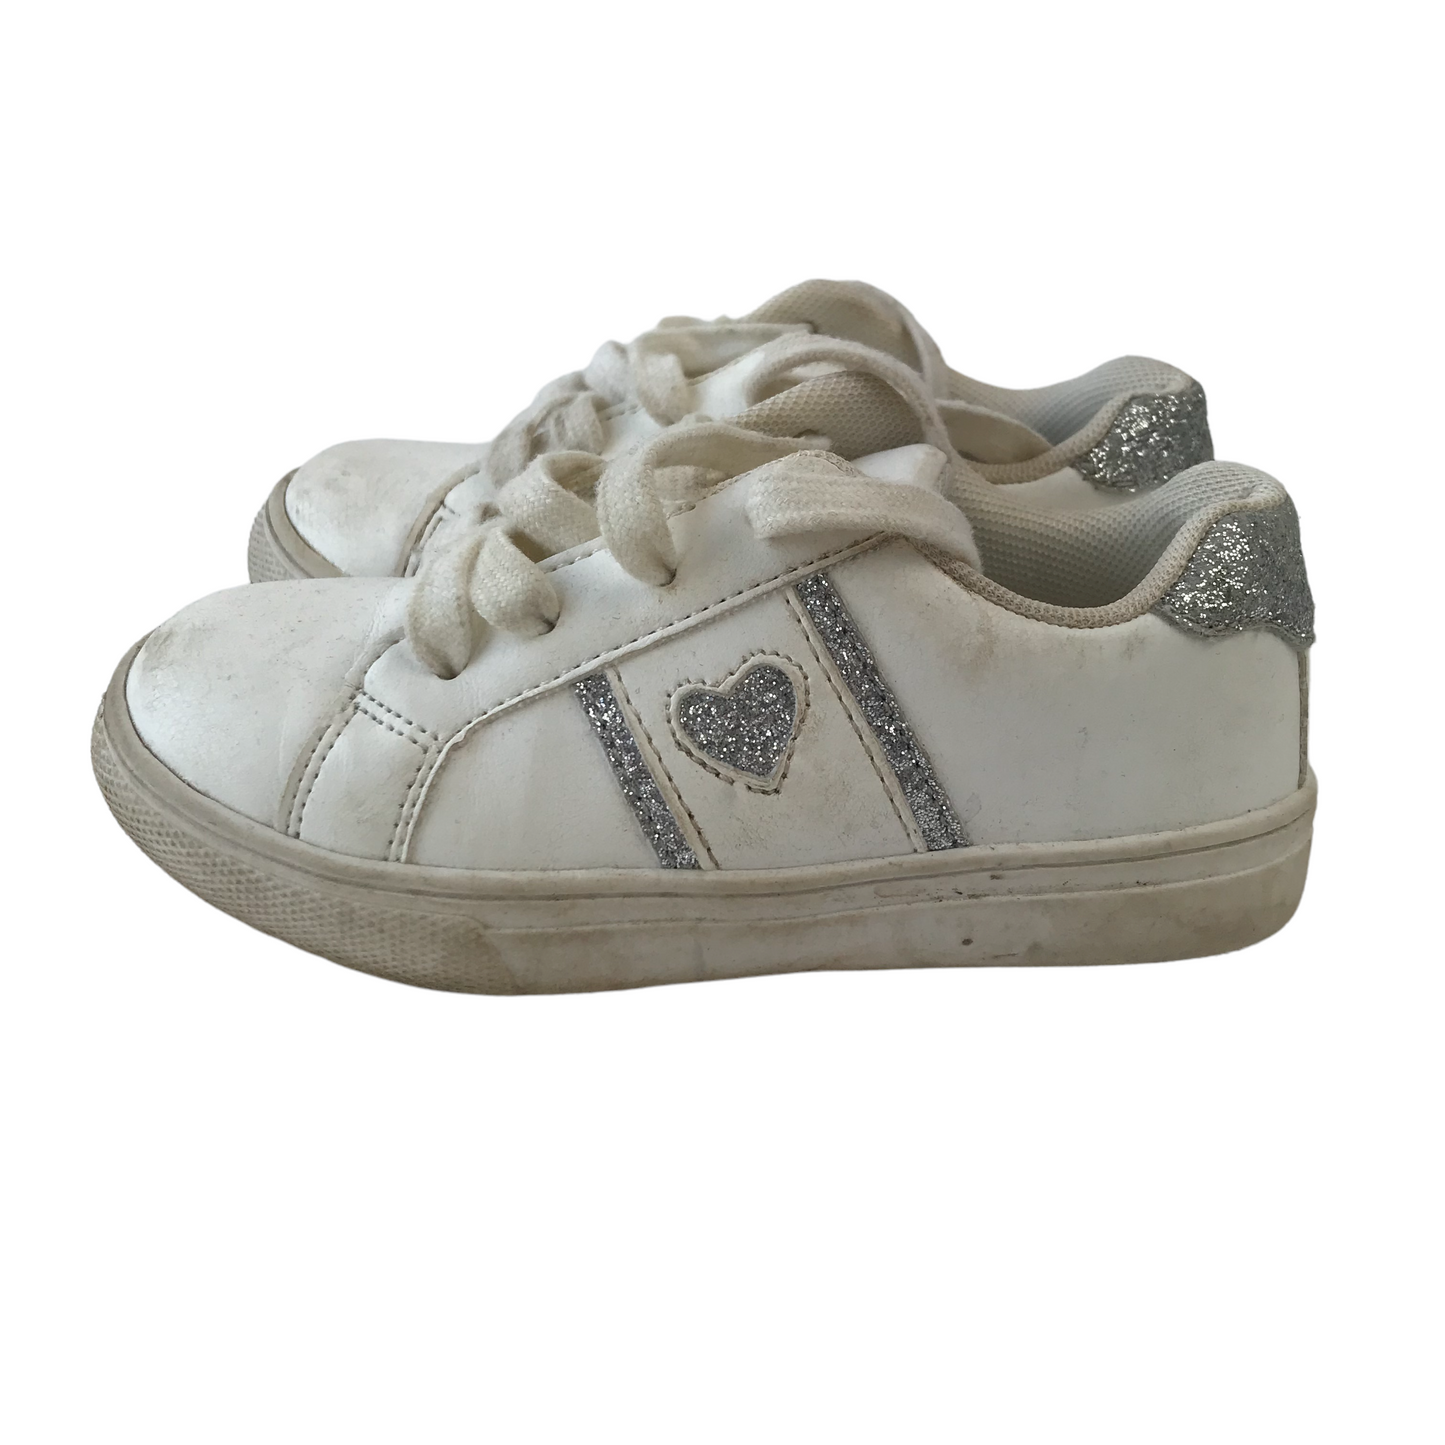 Primark White Trainers with Love Heart Detail Shoe Size 8 (jr)